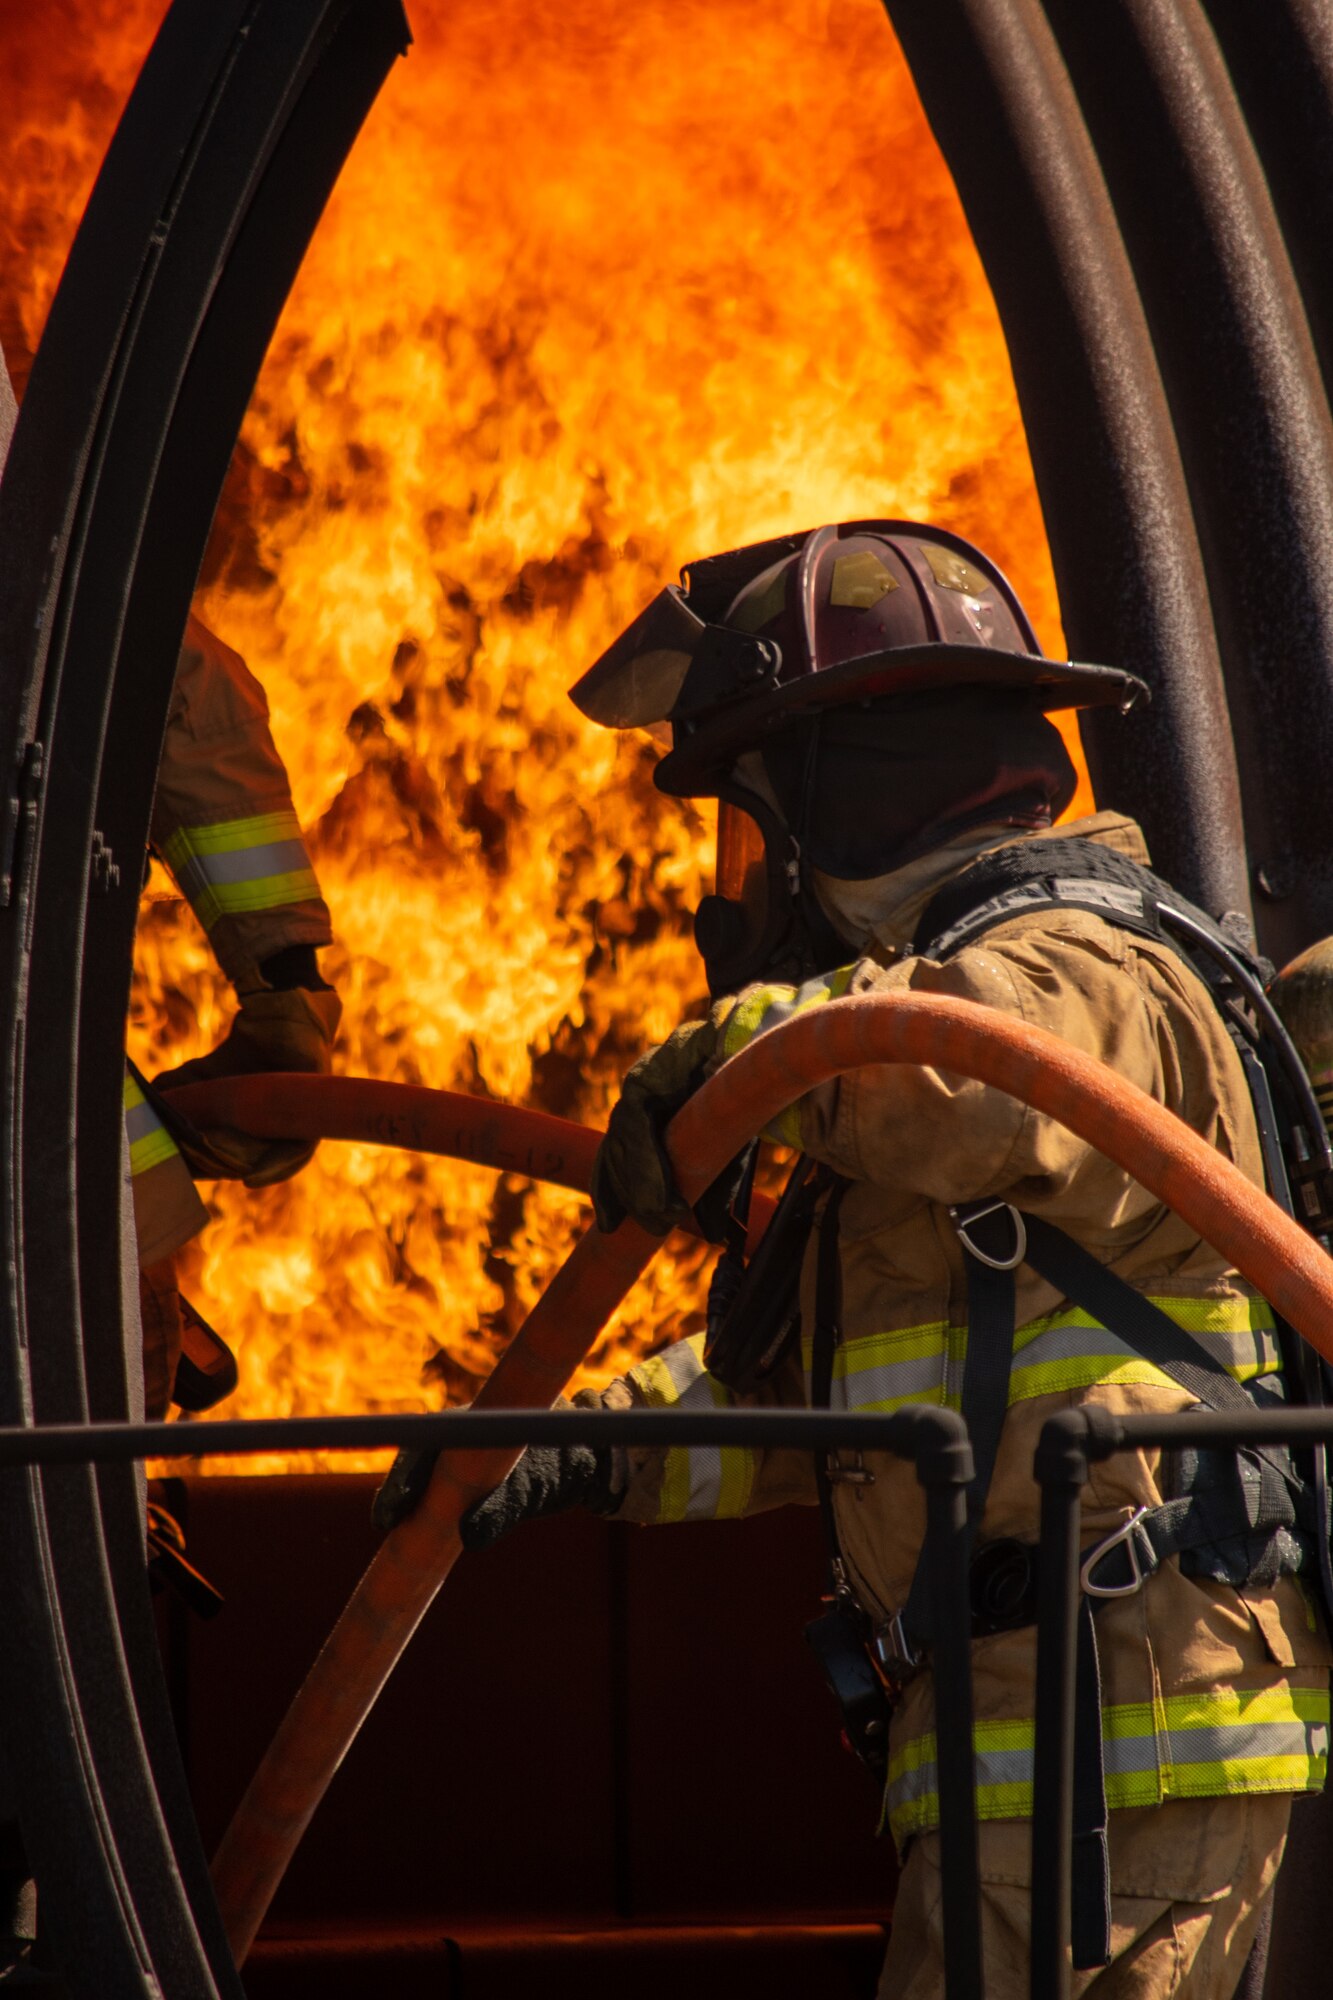 A U.S. Air Force firefighter pulls a fire hose into an aircraft fire trainer during a training exercise at Dover Air Force Base, Delaware, Sept. 22, 2020. Temperatures inside the aircraft fire trainer can reach up to 1,500 degrees Fahrenheit. (U.S. Air Force photo by Airman Brandan Hollis)